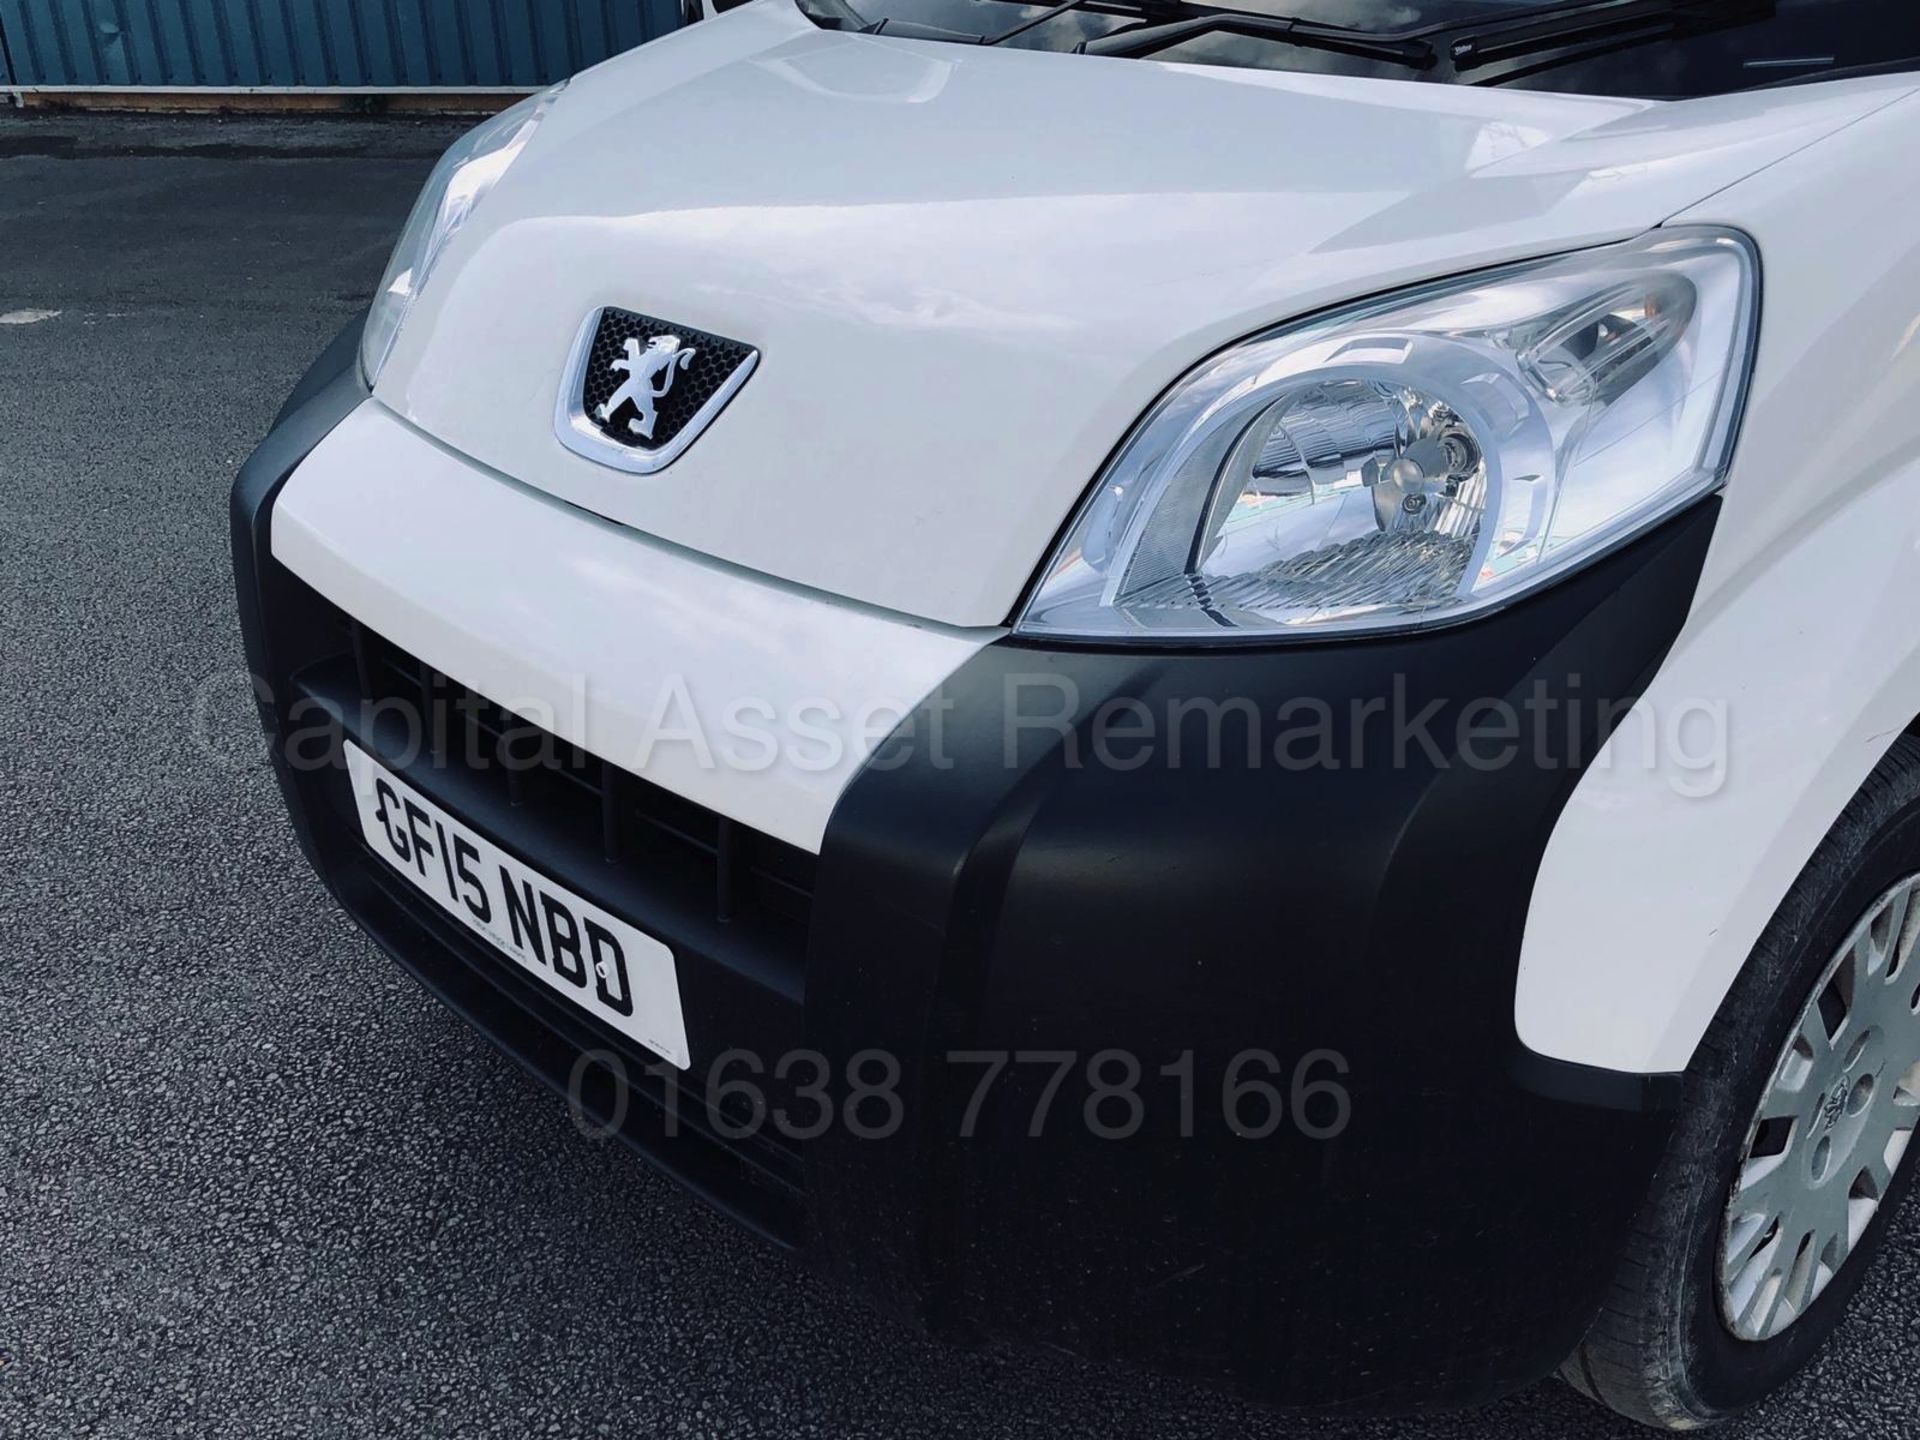 (On Sale) PEUGEOT BIPPER 'SE EDITION' (2015 - 15 REG) 'HDI - 75 BHP - 5 SPEED' **ELEC PACK** - Image 9 of 20